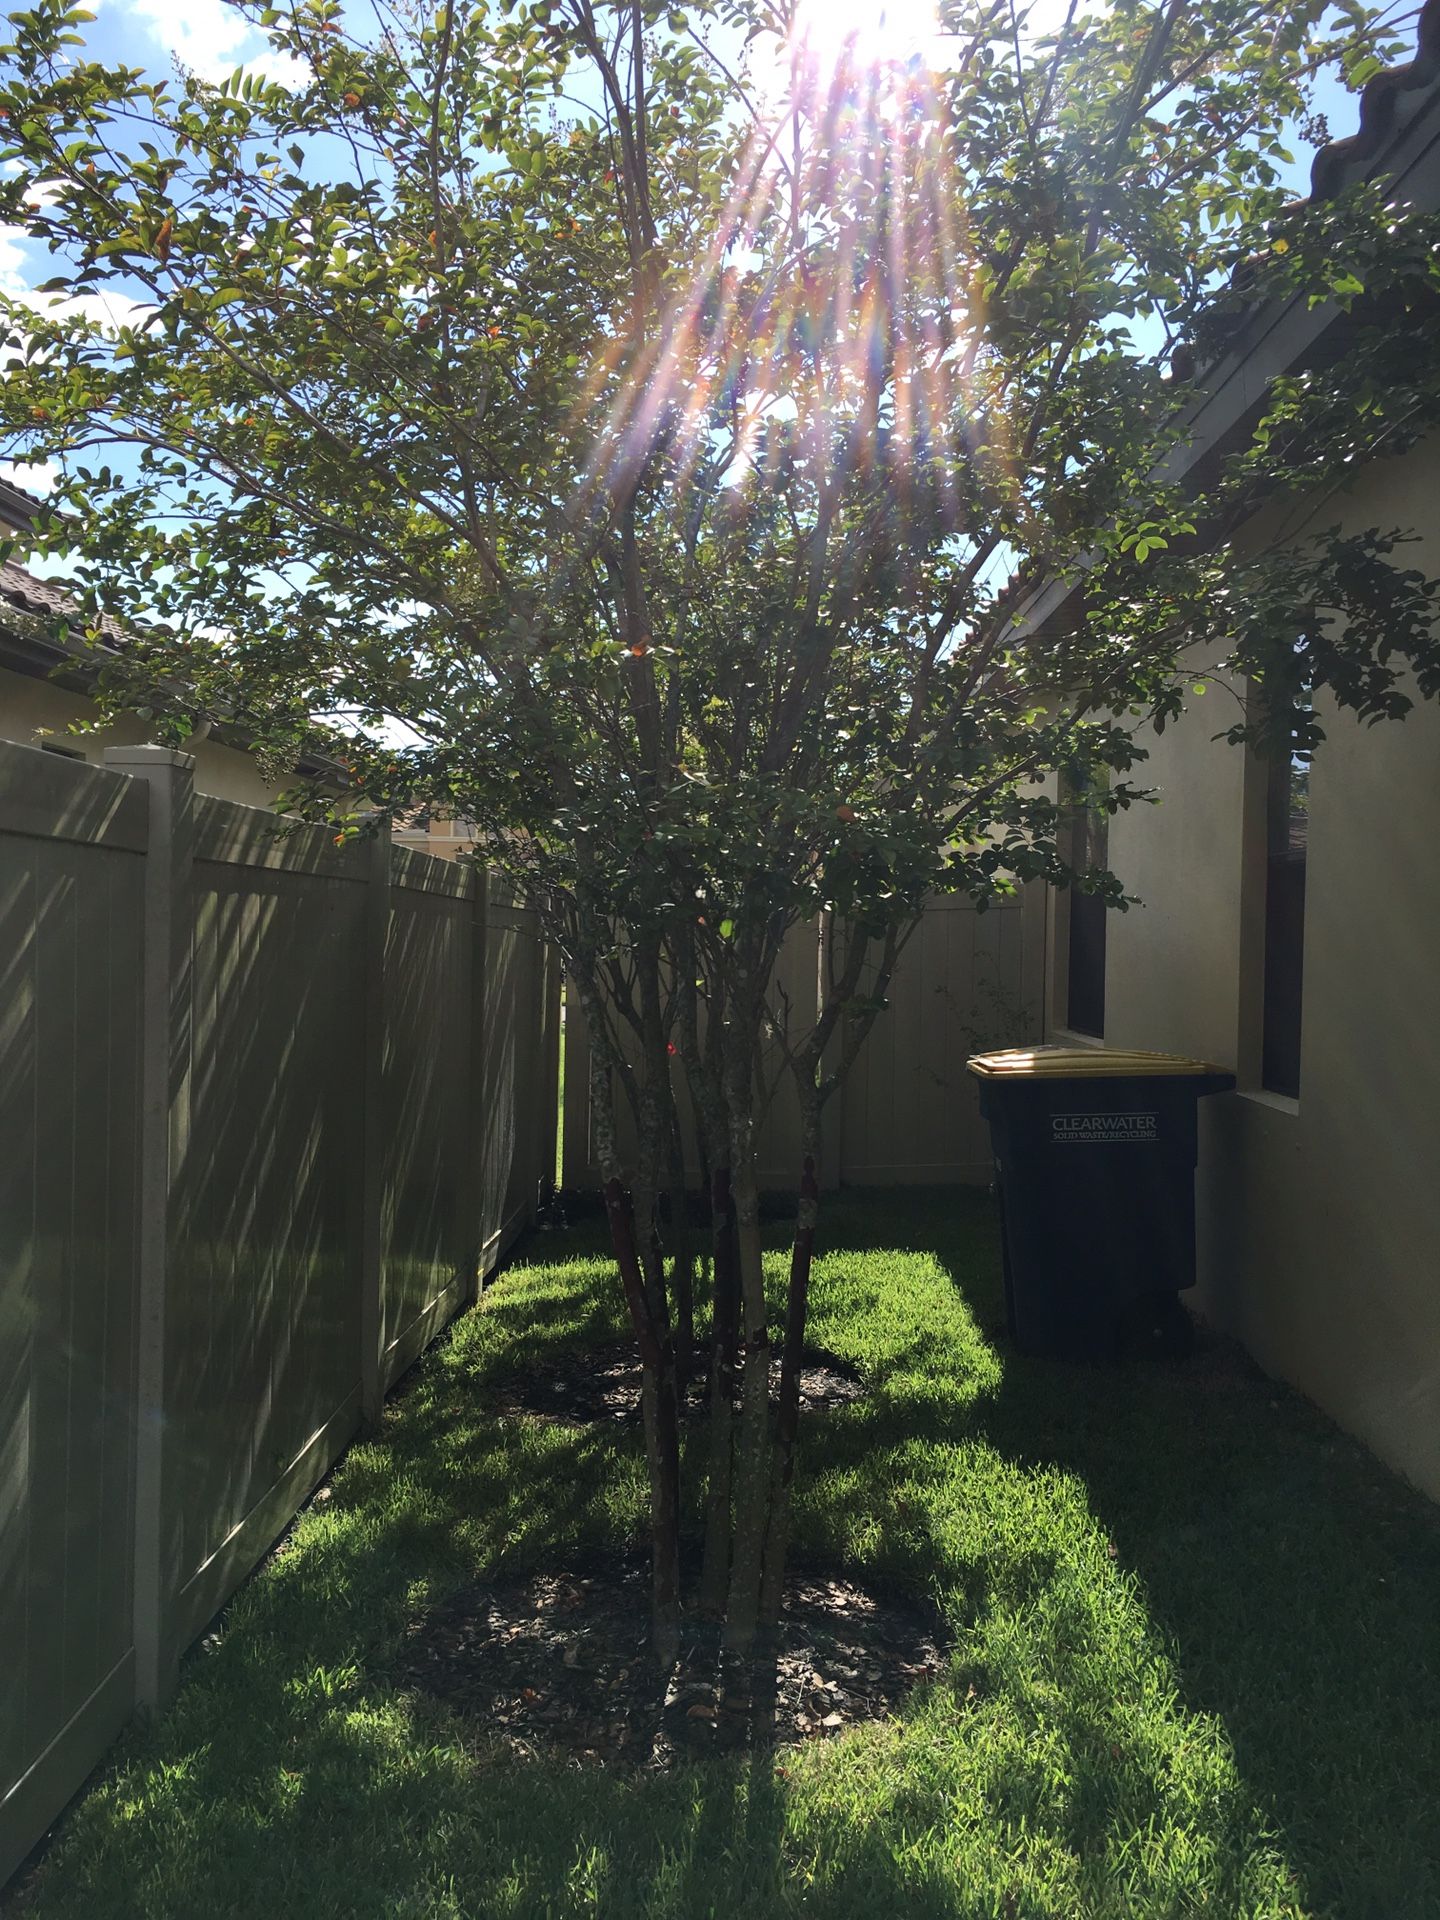 Two free White Crepe Myrtle trees